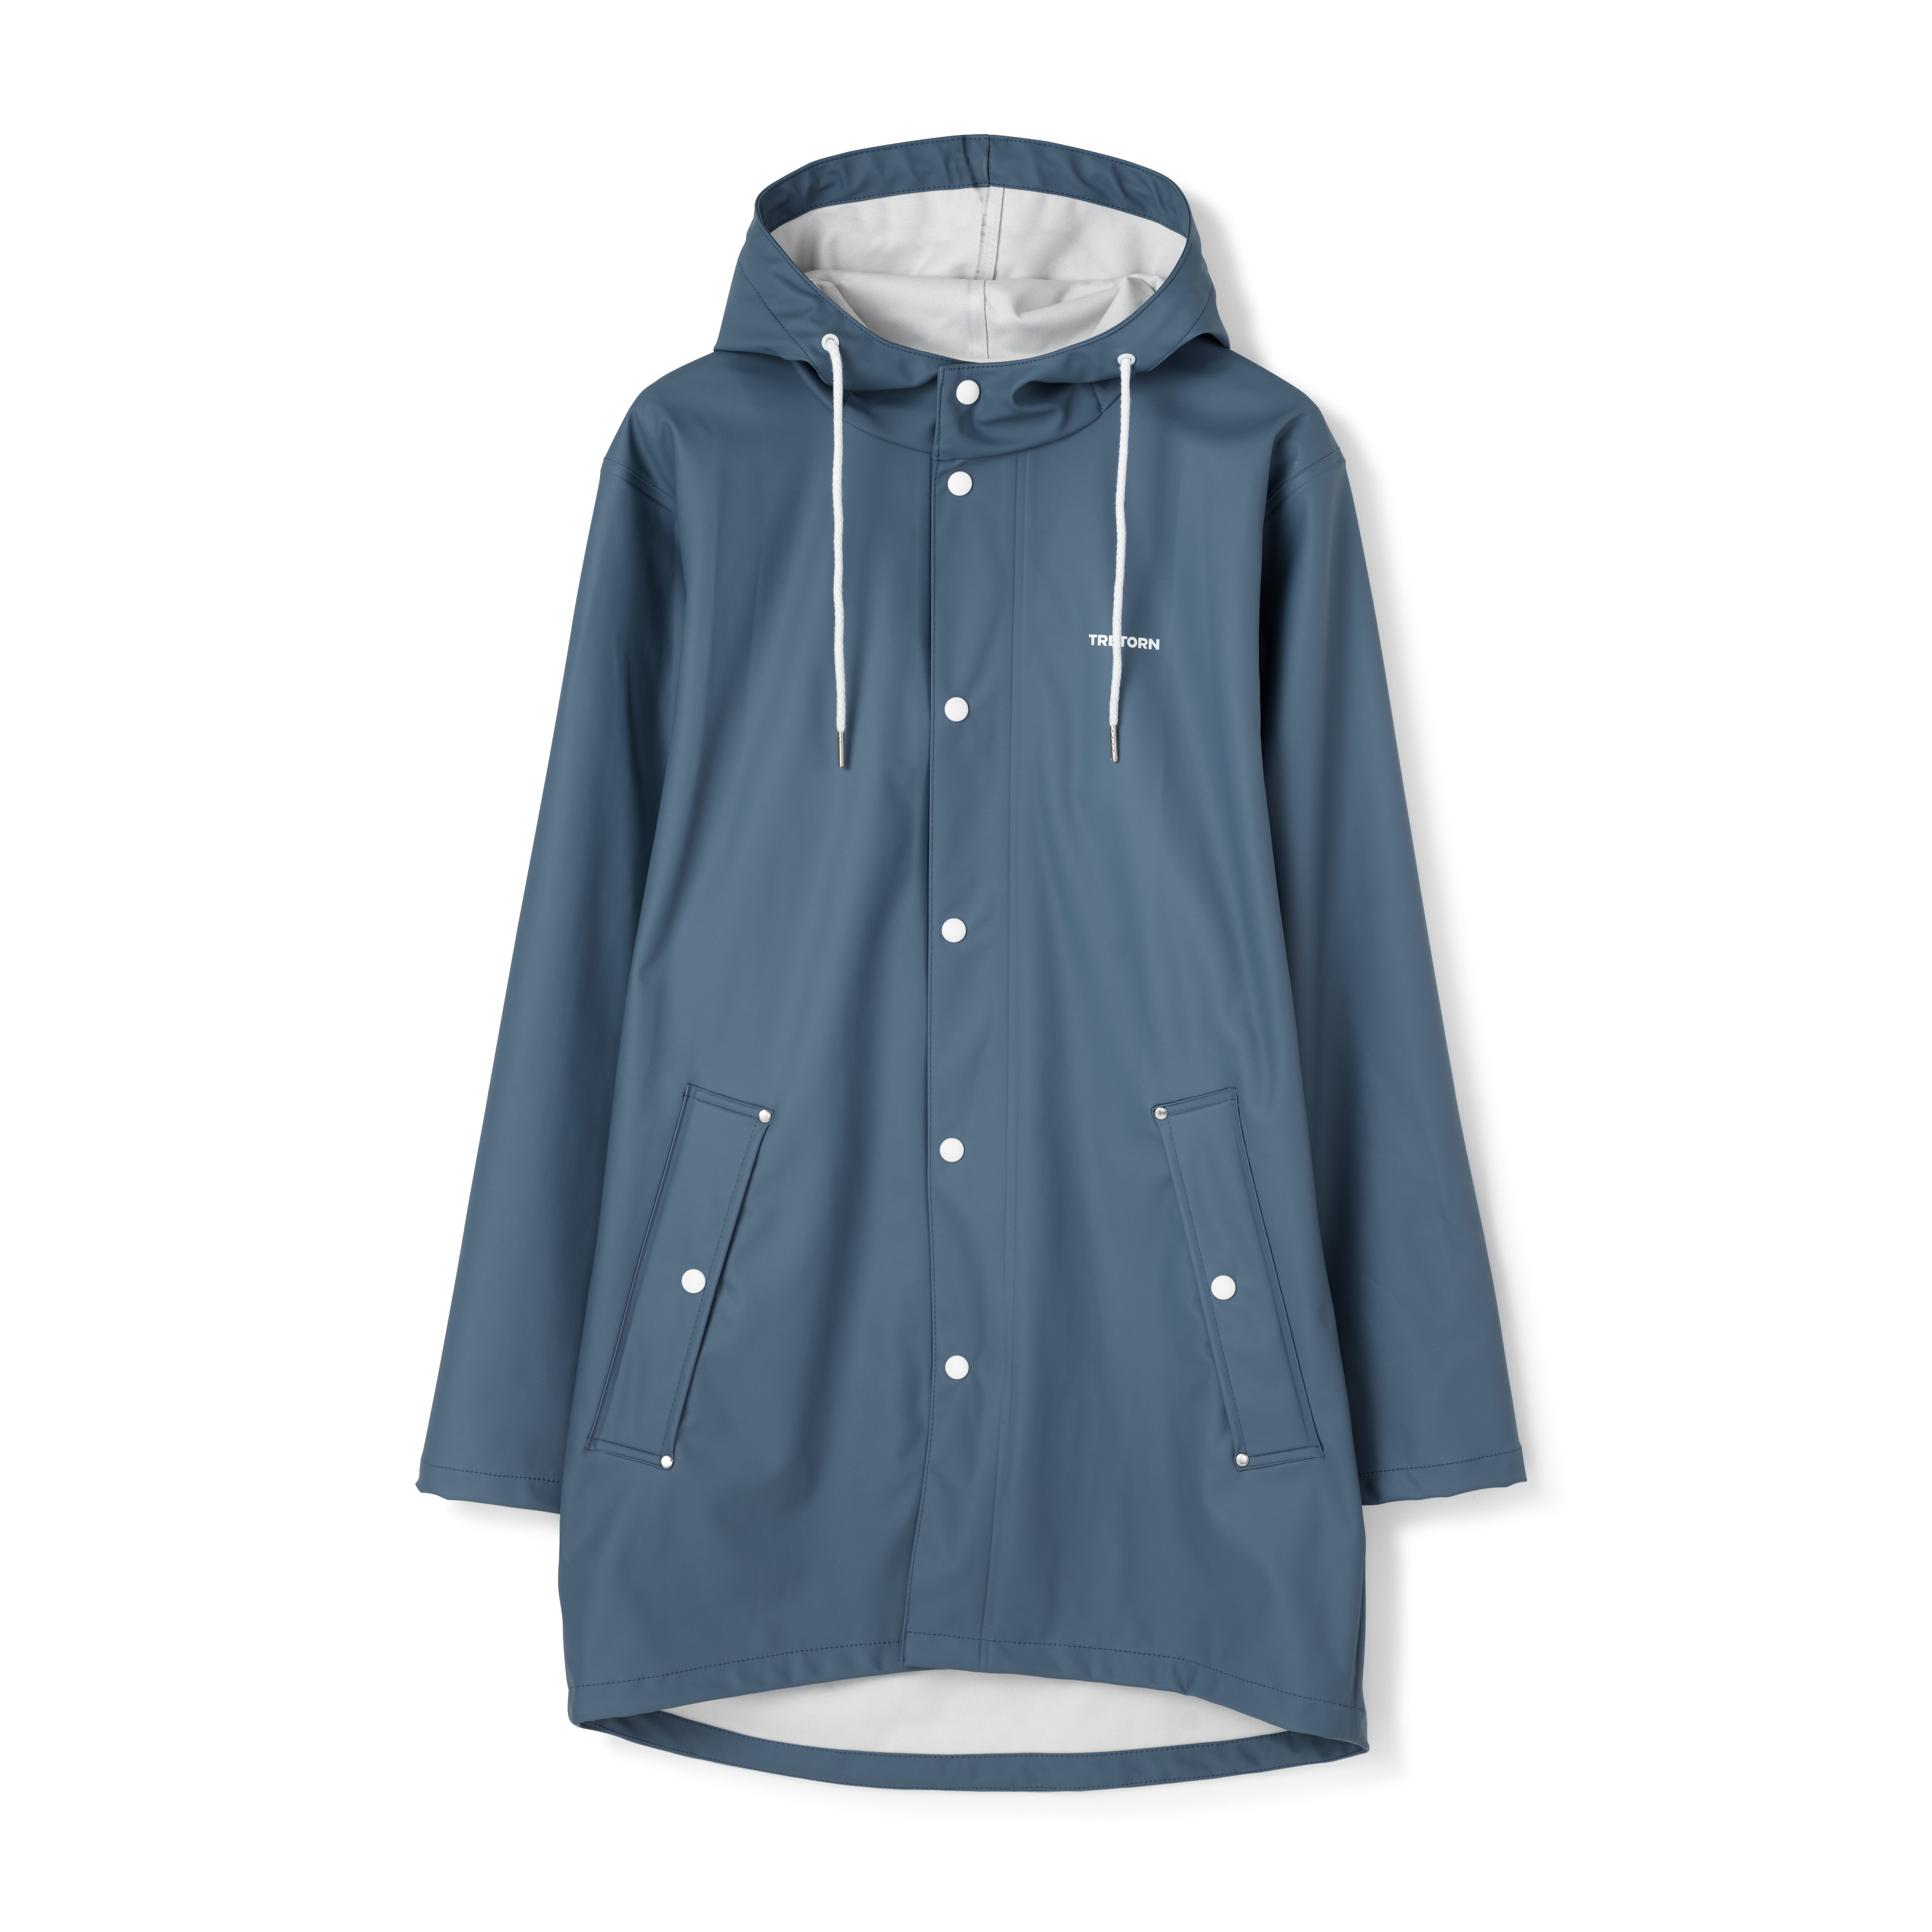 Wings rain jacket by Tretorn for men and women in the colour stone blue